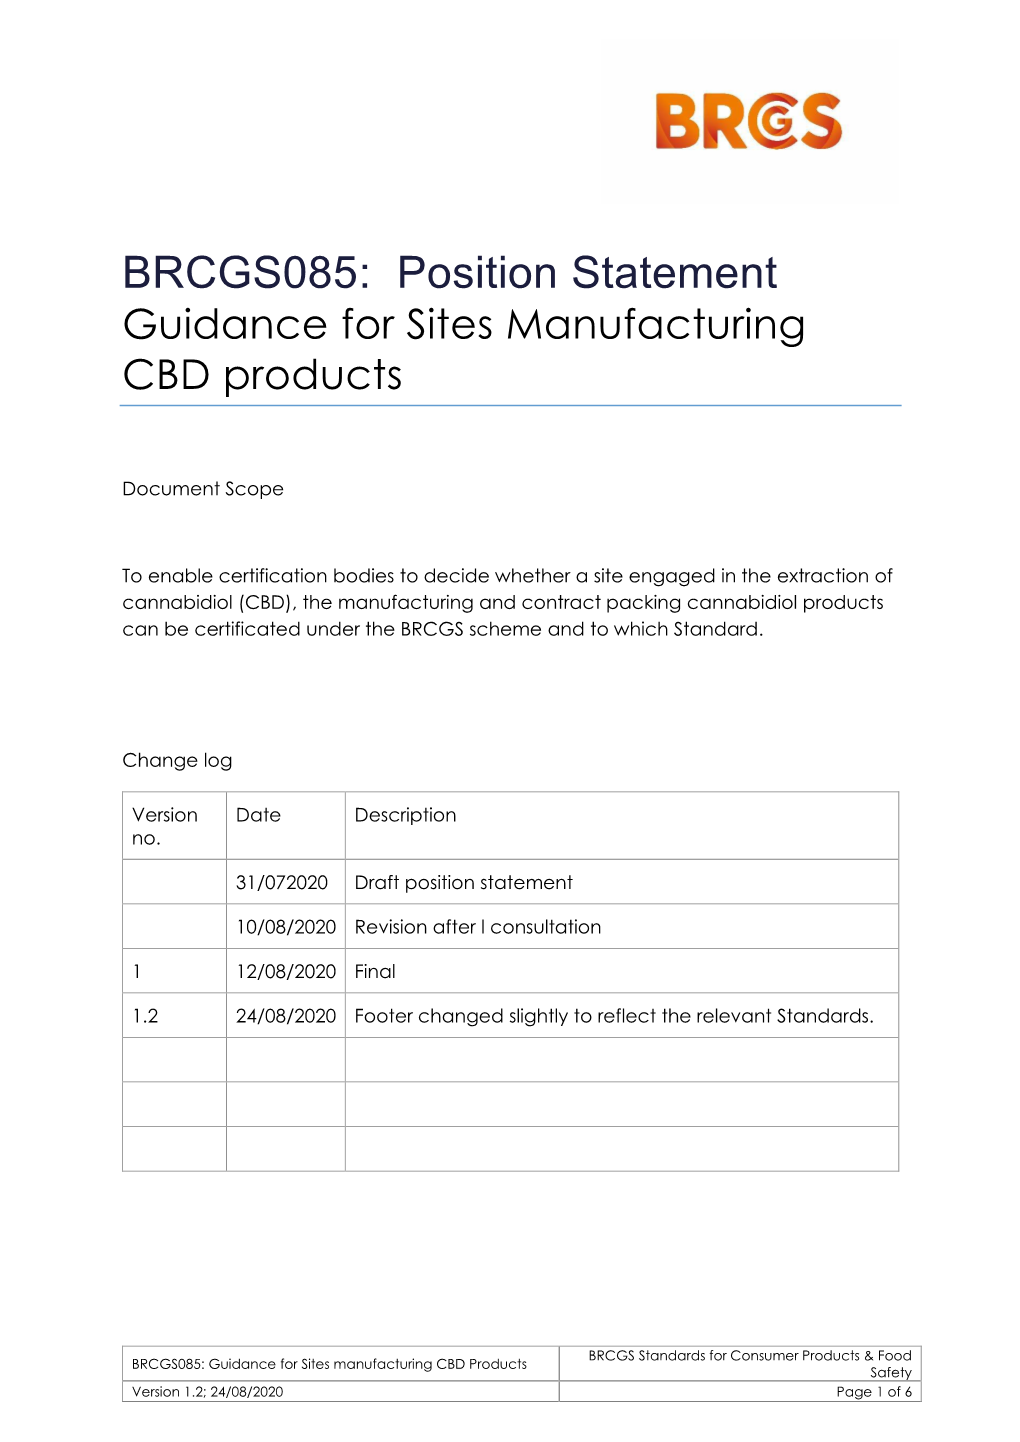 BRCGS085: Position Statement Guidance for Sites Manufacturing CBD Products